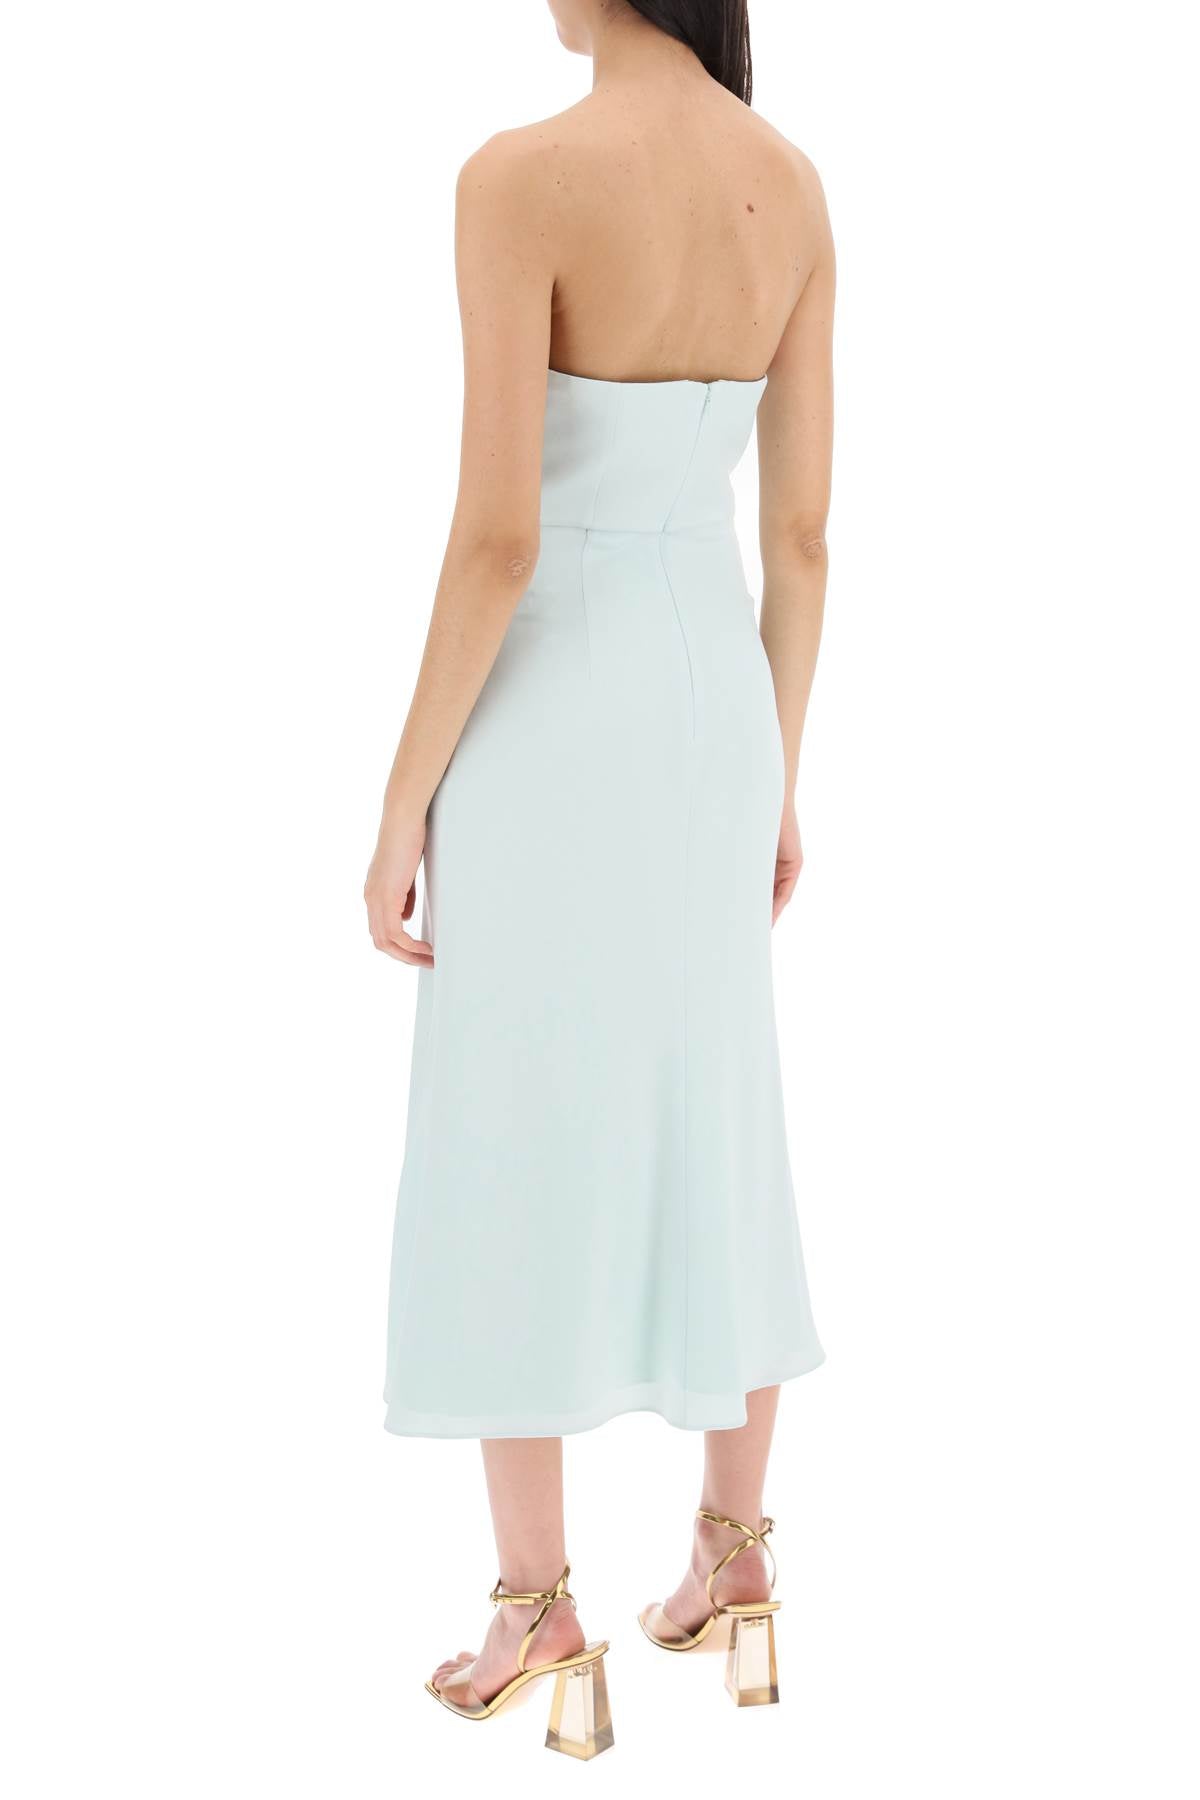 Roland mouret strapless midi dress without-2